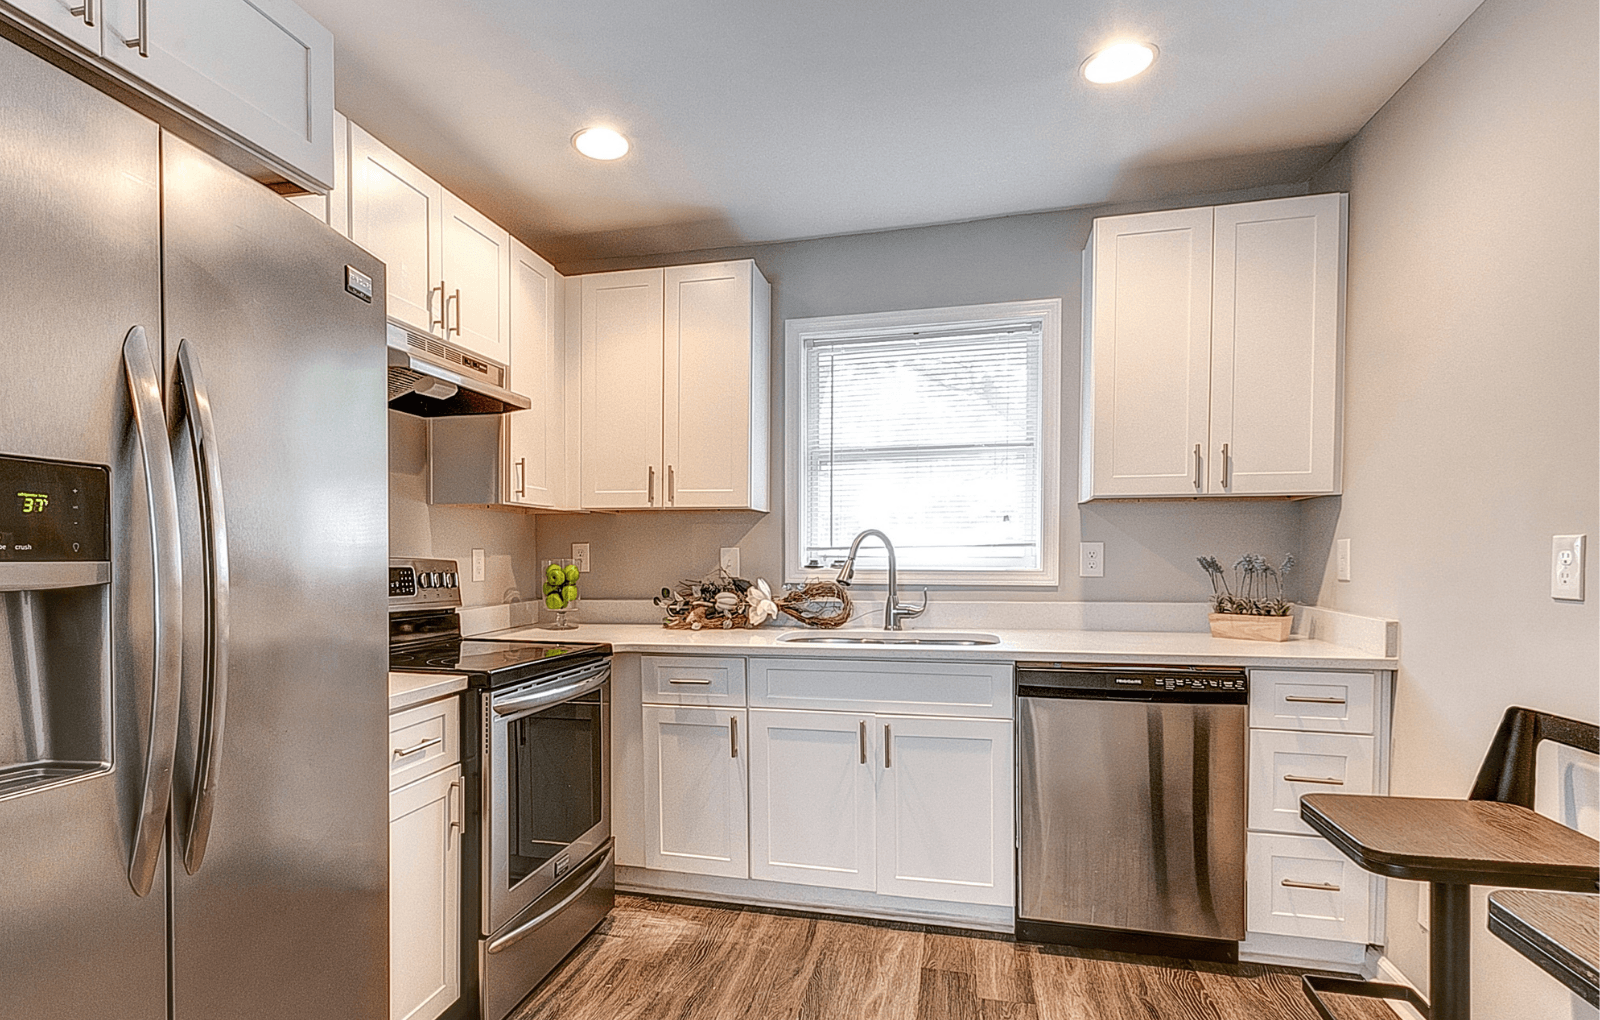 Upgraded Kitchen Stainless Steel Appliances